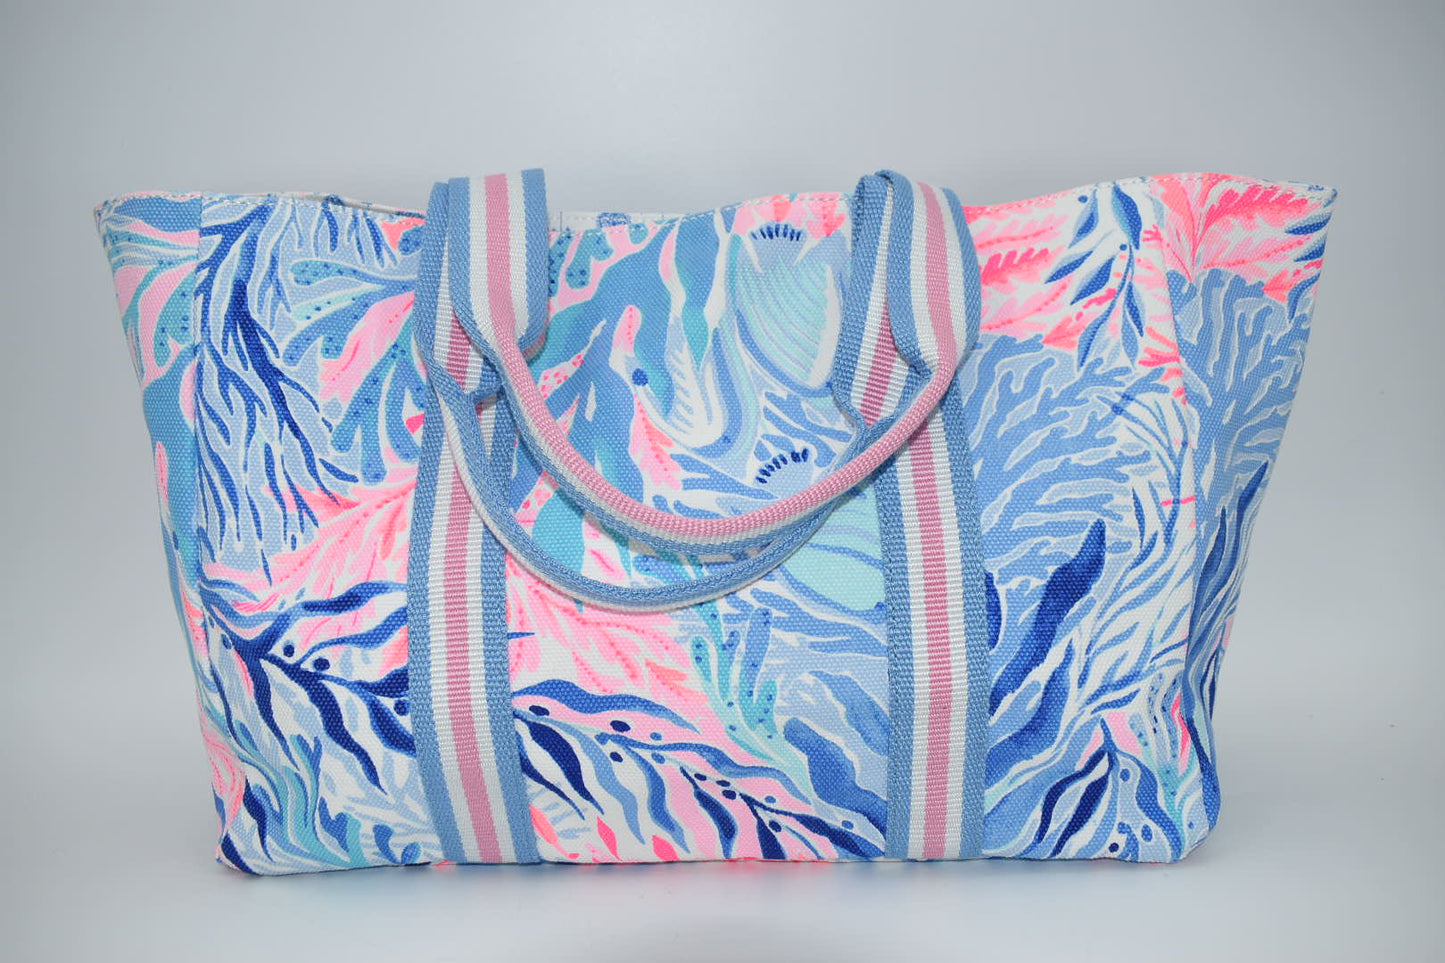 Lilly Pulitzer Lilly's Lagoon Tote Bag in Crew Blue Tint Kaleidoscope Coral